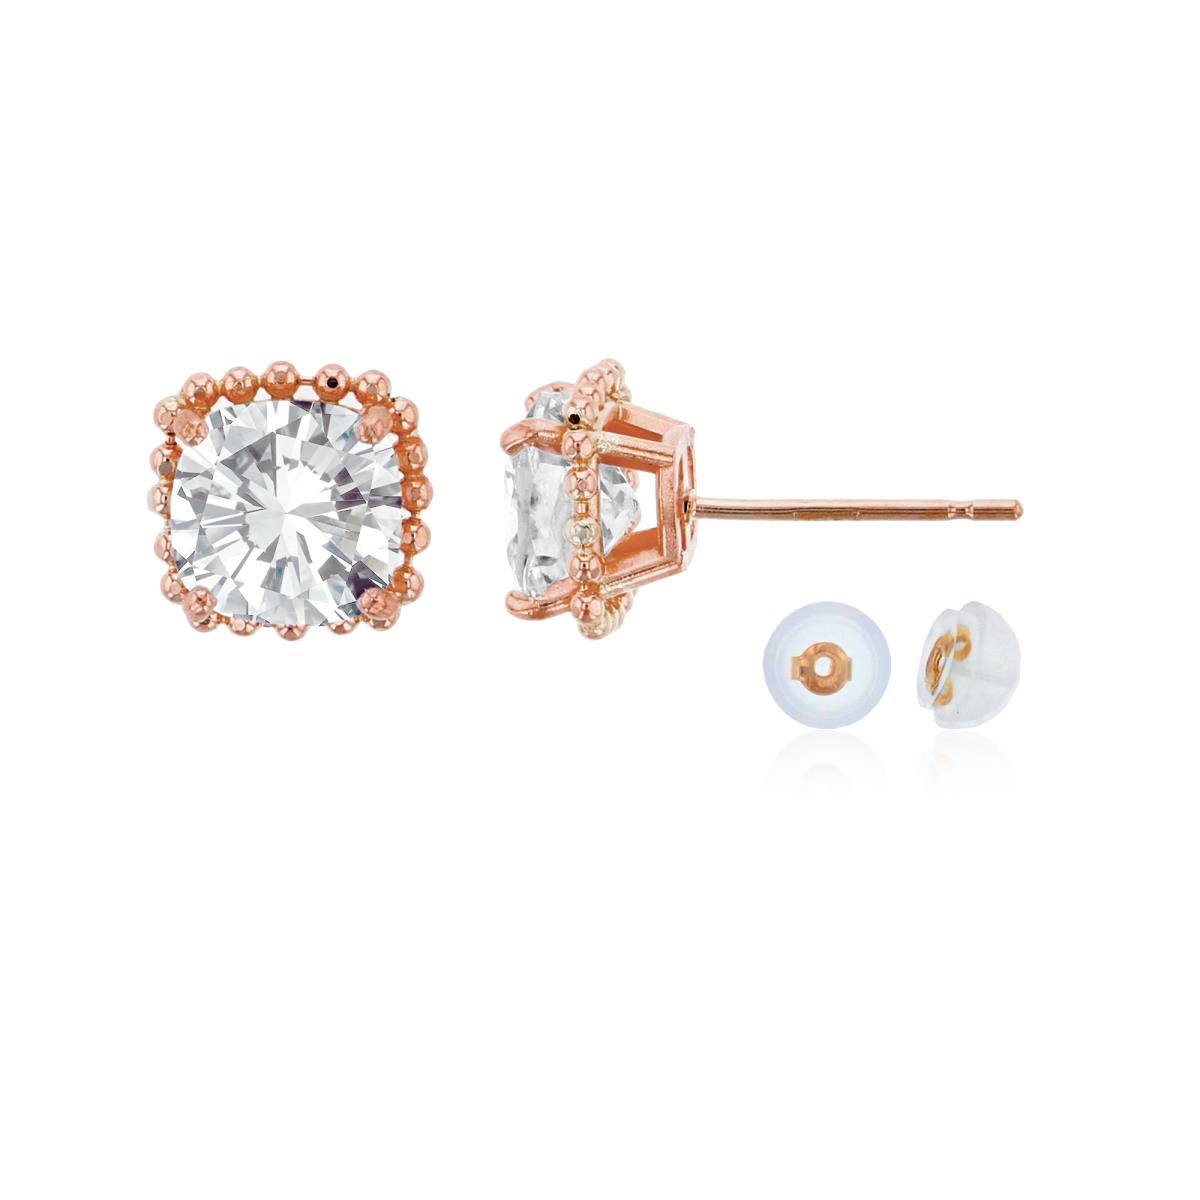 10K Rose Gold 6x6mm Cushion Cut White Topaz Bead Frame Stud Earring with Silicone Back